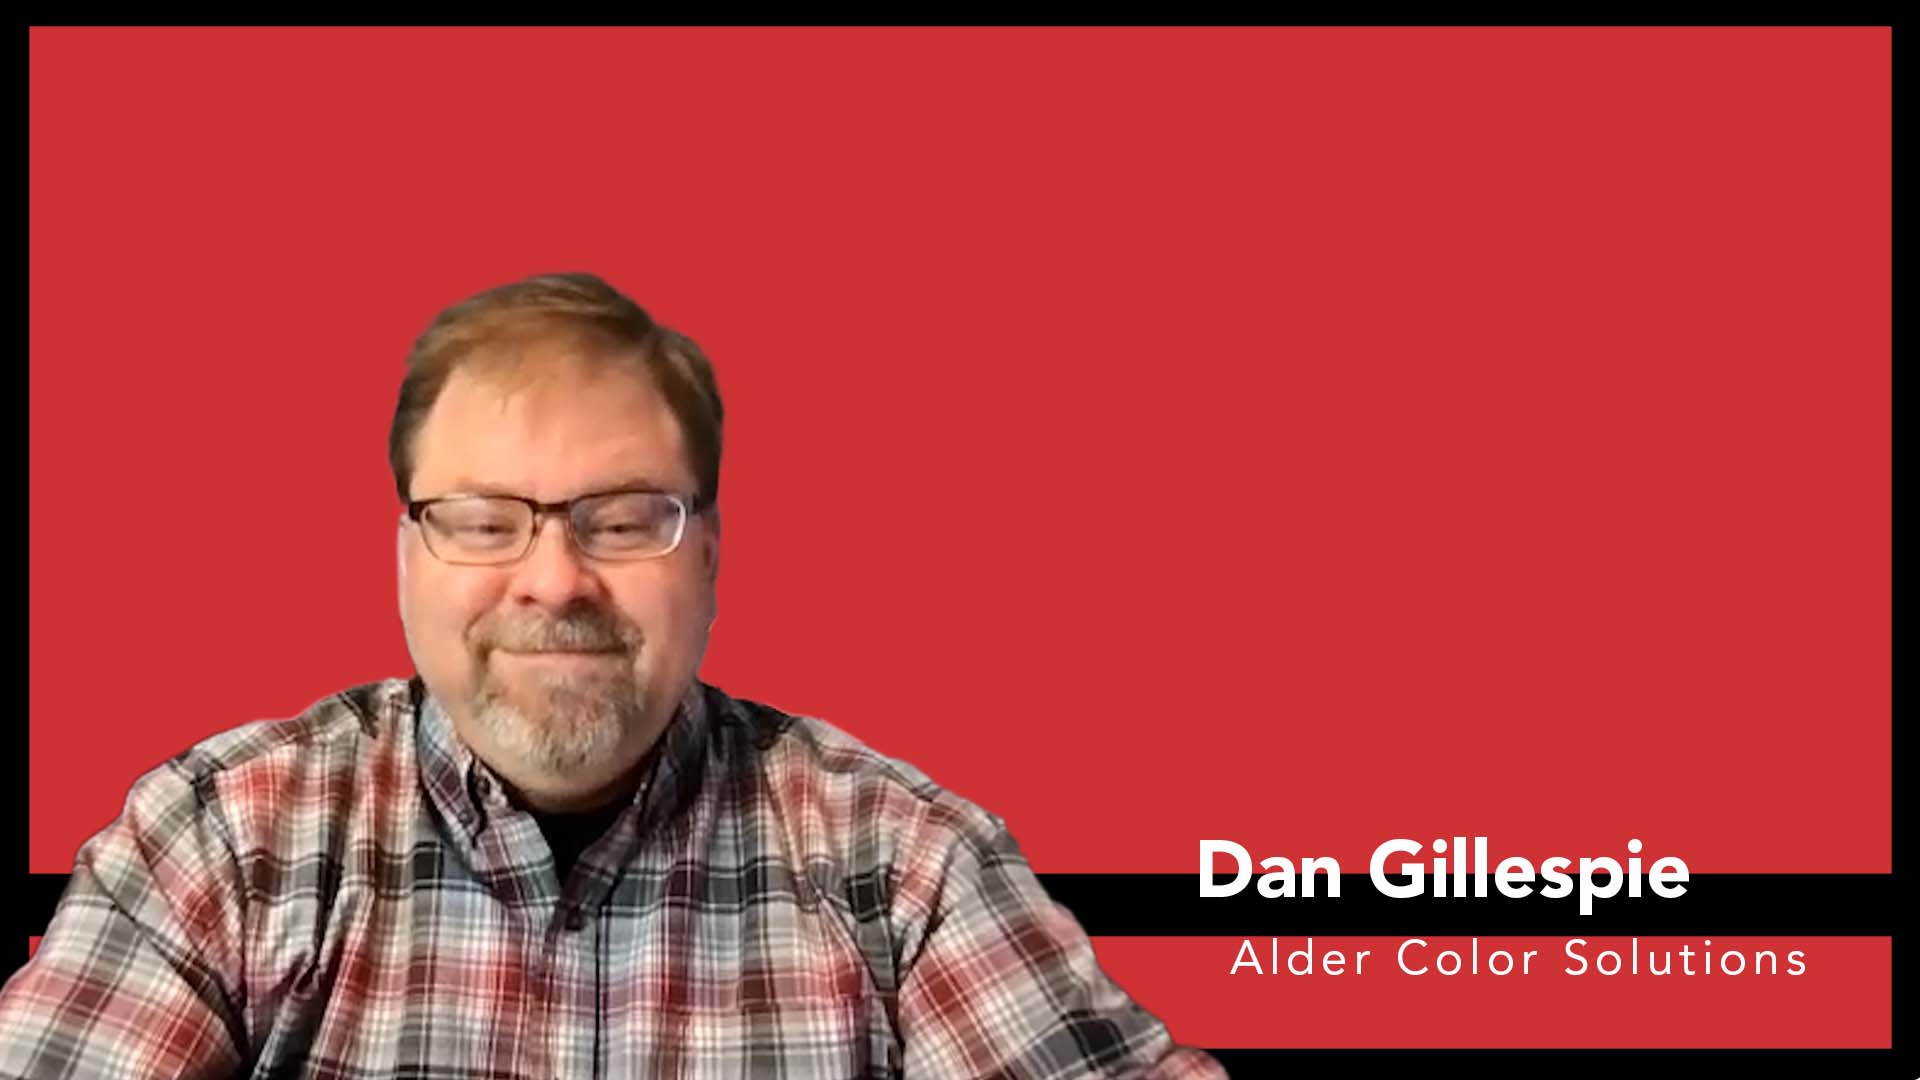 Video preview: Dan Gillespie Geeks Out About Standard Viewing Conditions